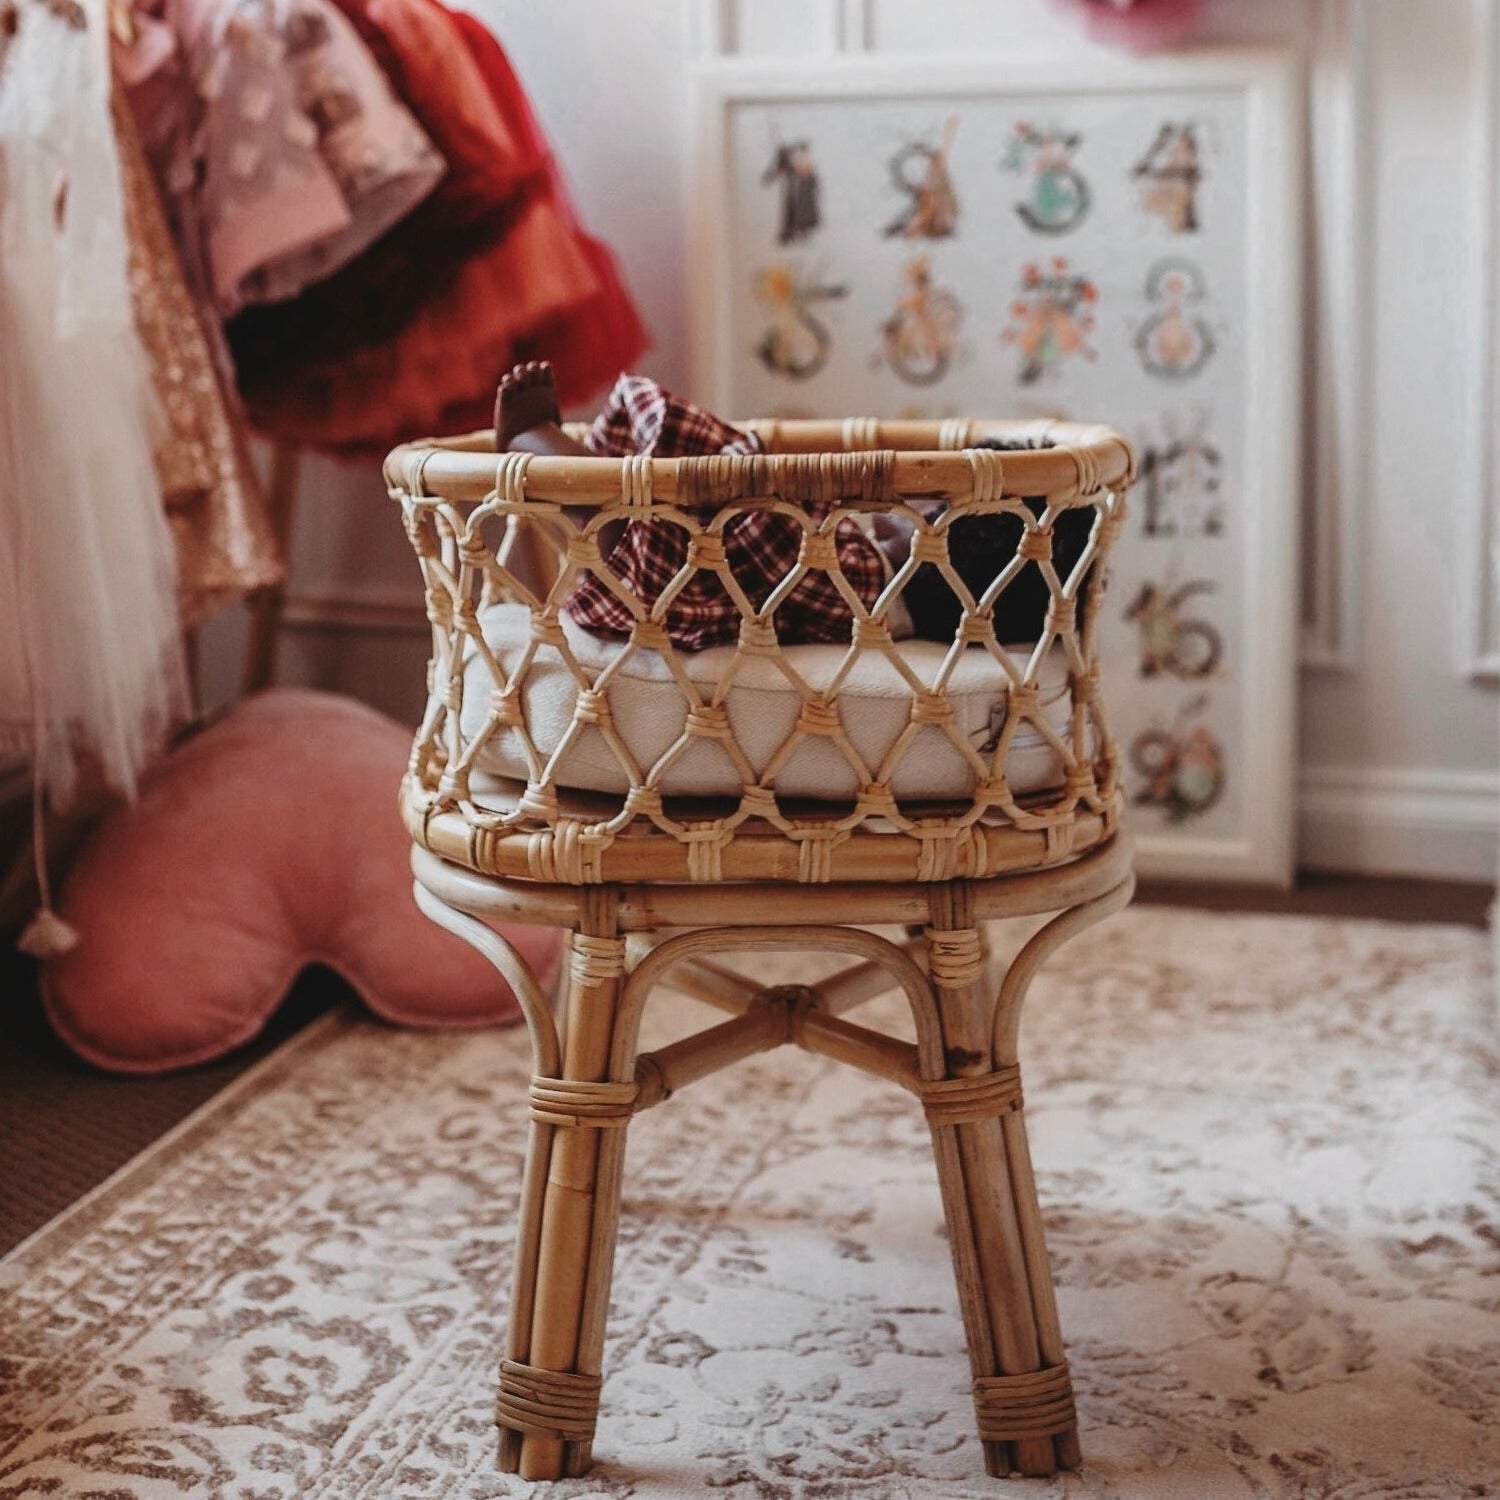 Tiny Harlow Doll's Rattan Bassinet. Toy Cot.